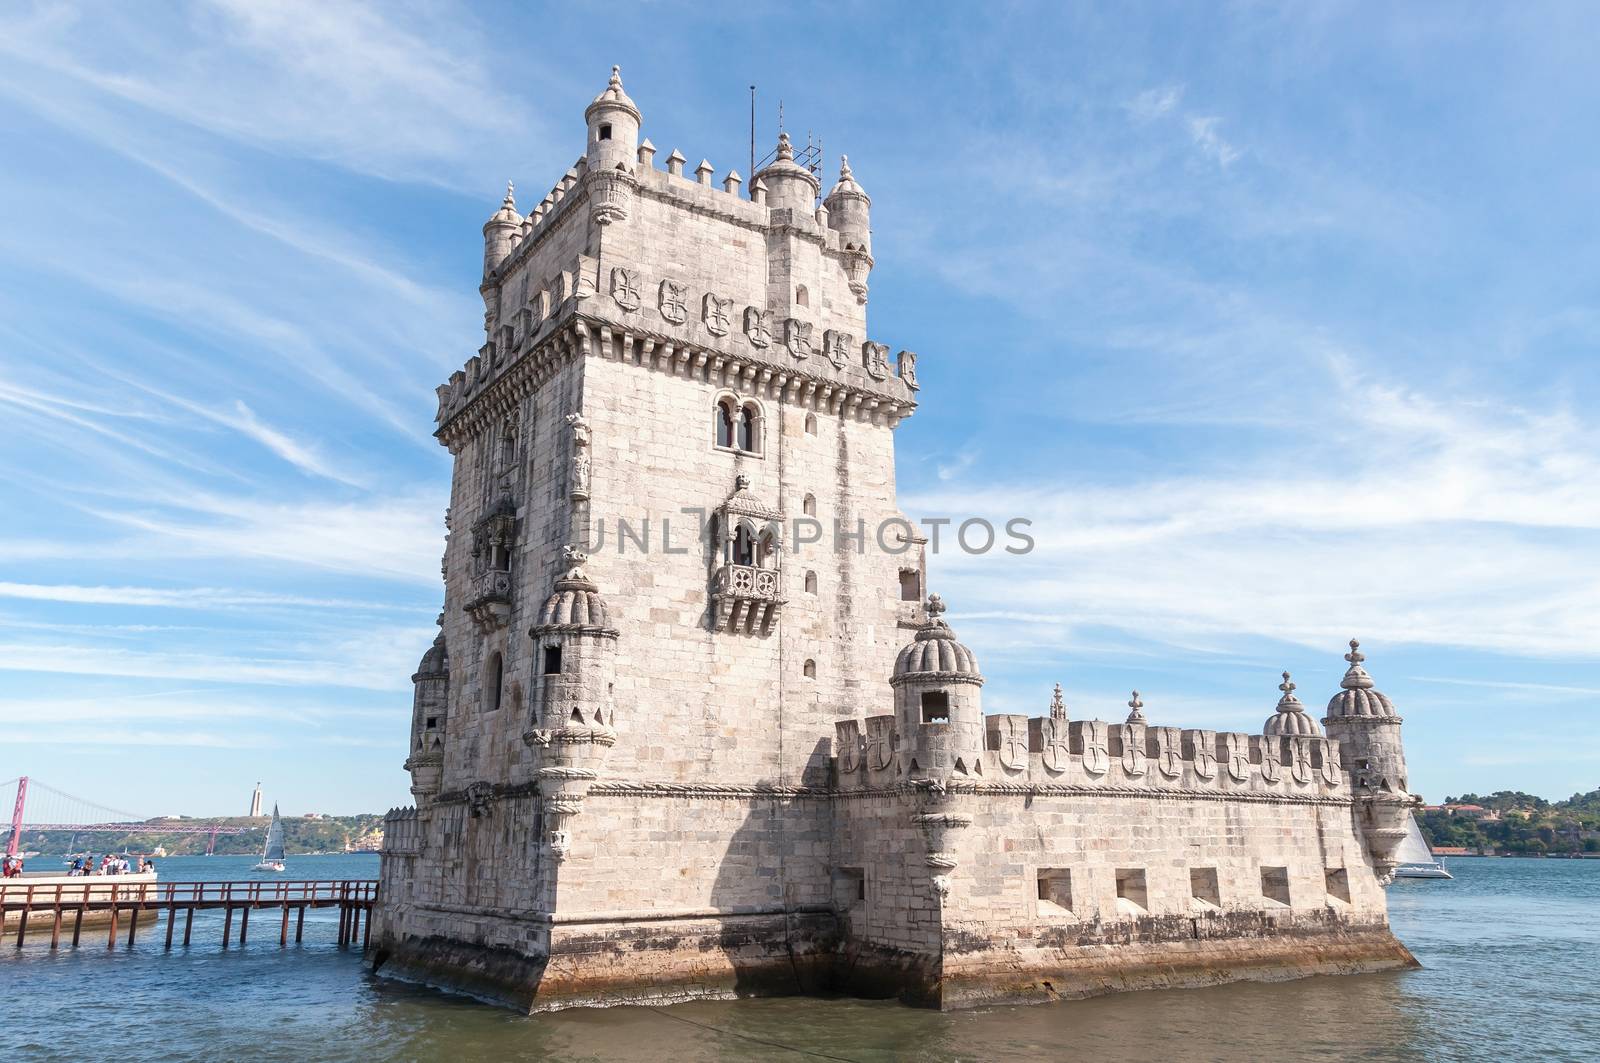 Tower of Belem on the bank of the Tagus River